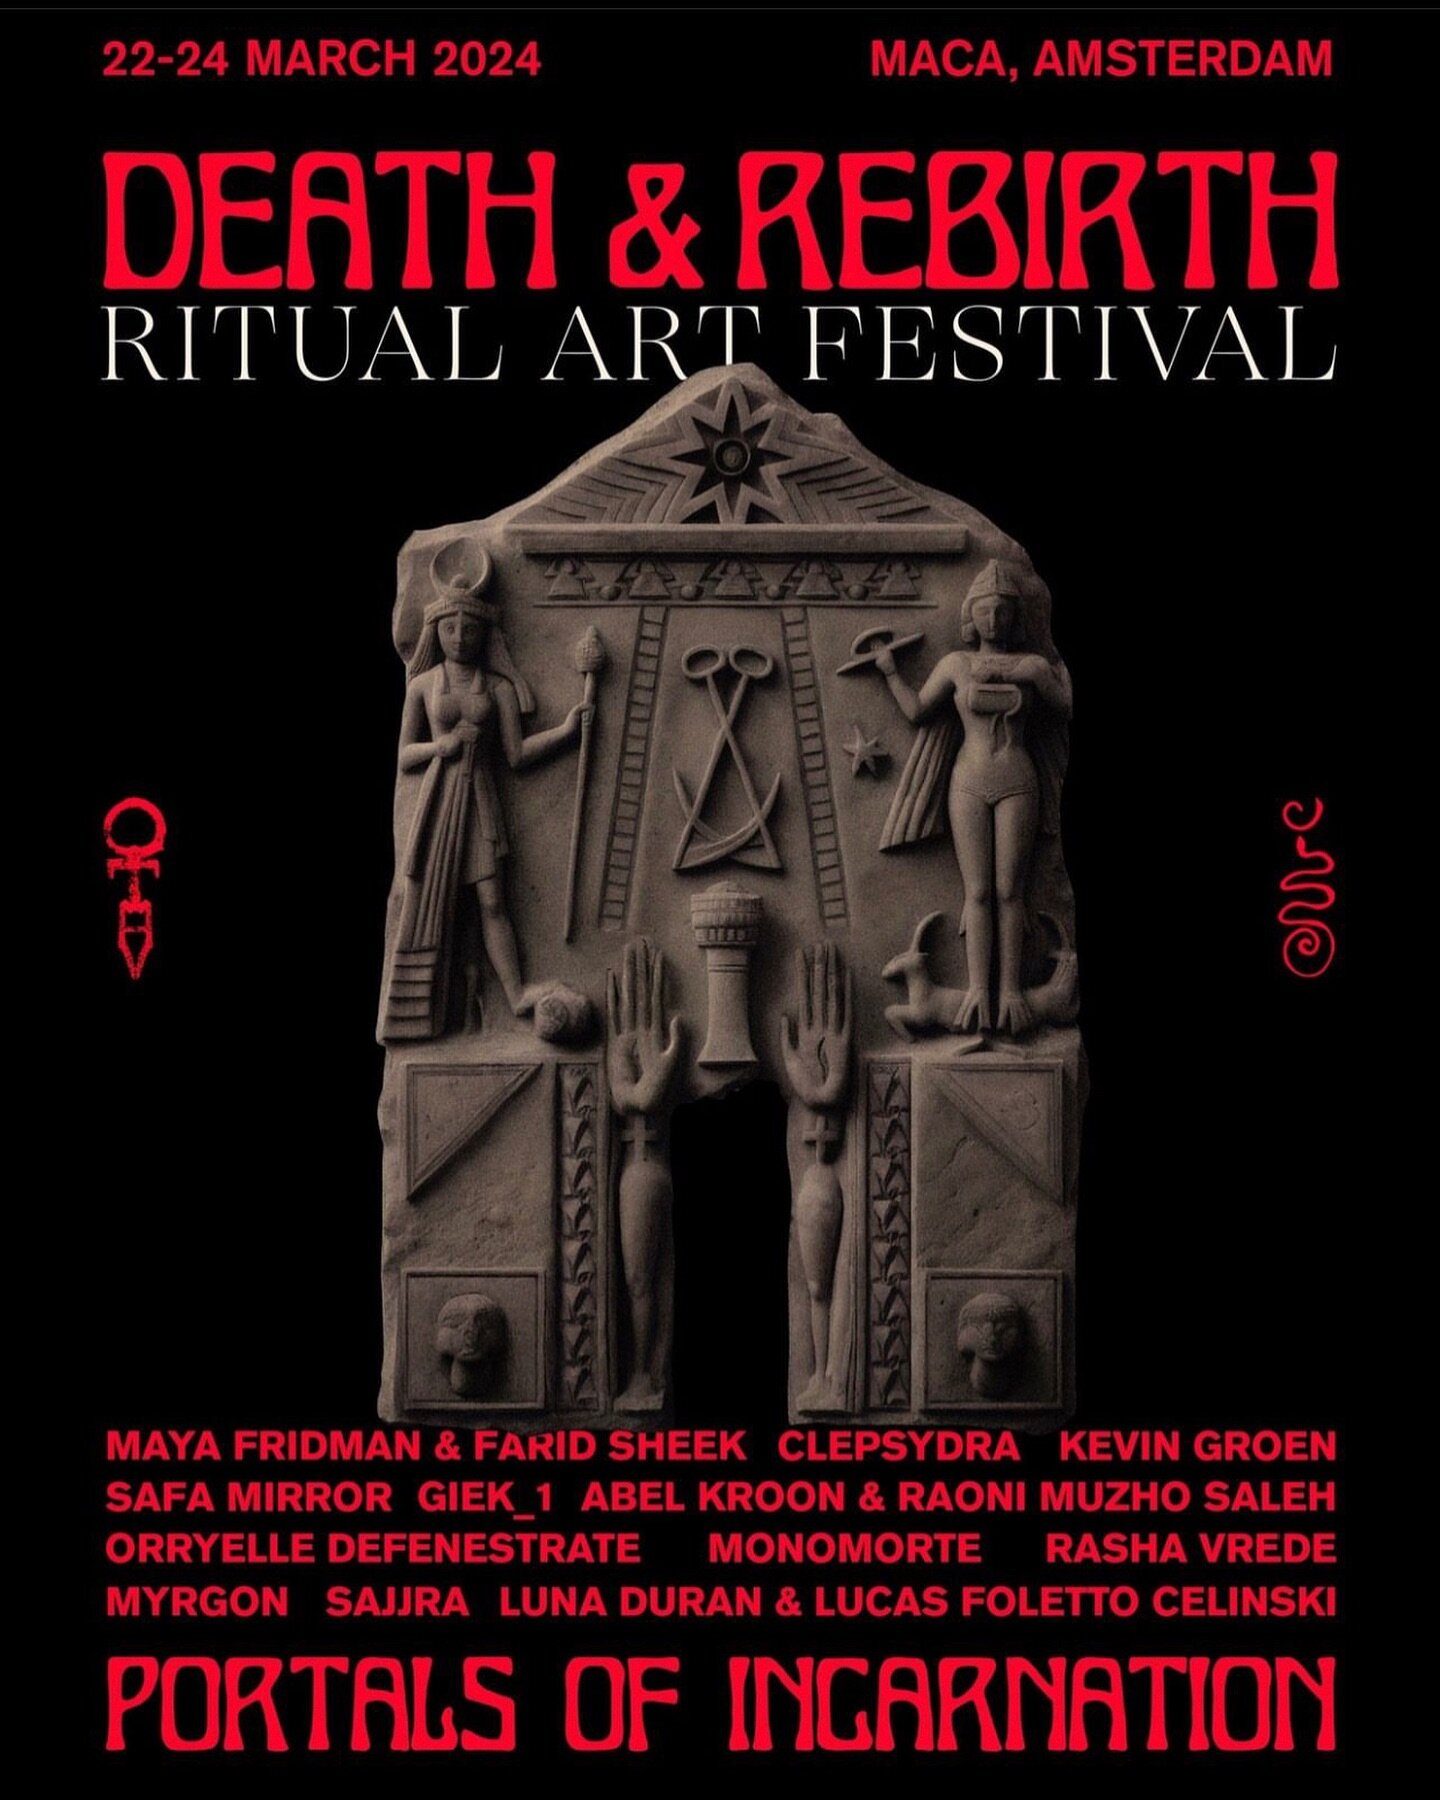 In the final stages of preparations for this weekend in Amsterdam for @deathandrebirth_artfestival. Lucas and I will be performing Sunday the 24th. Recalling an ancient dance for Venus. Tickets are still available. Check my stories for a link. See yo